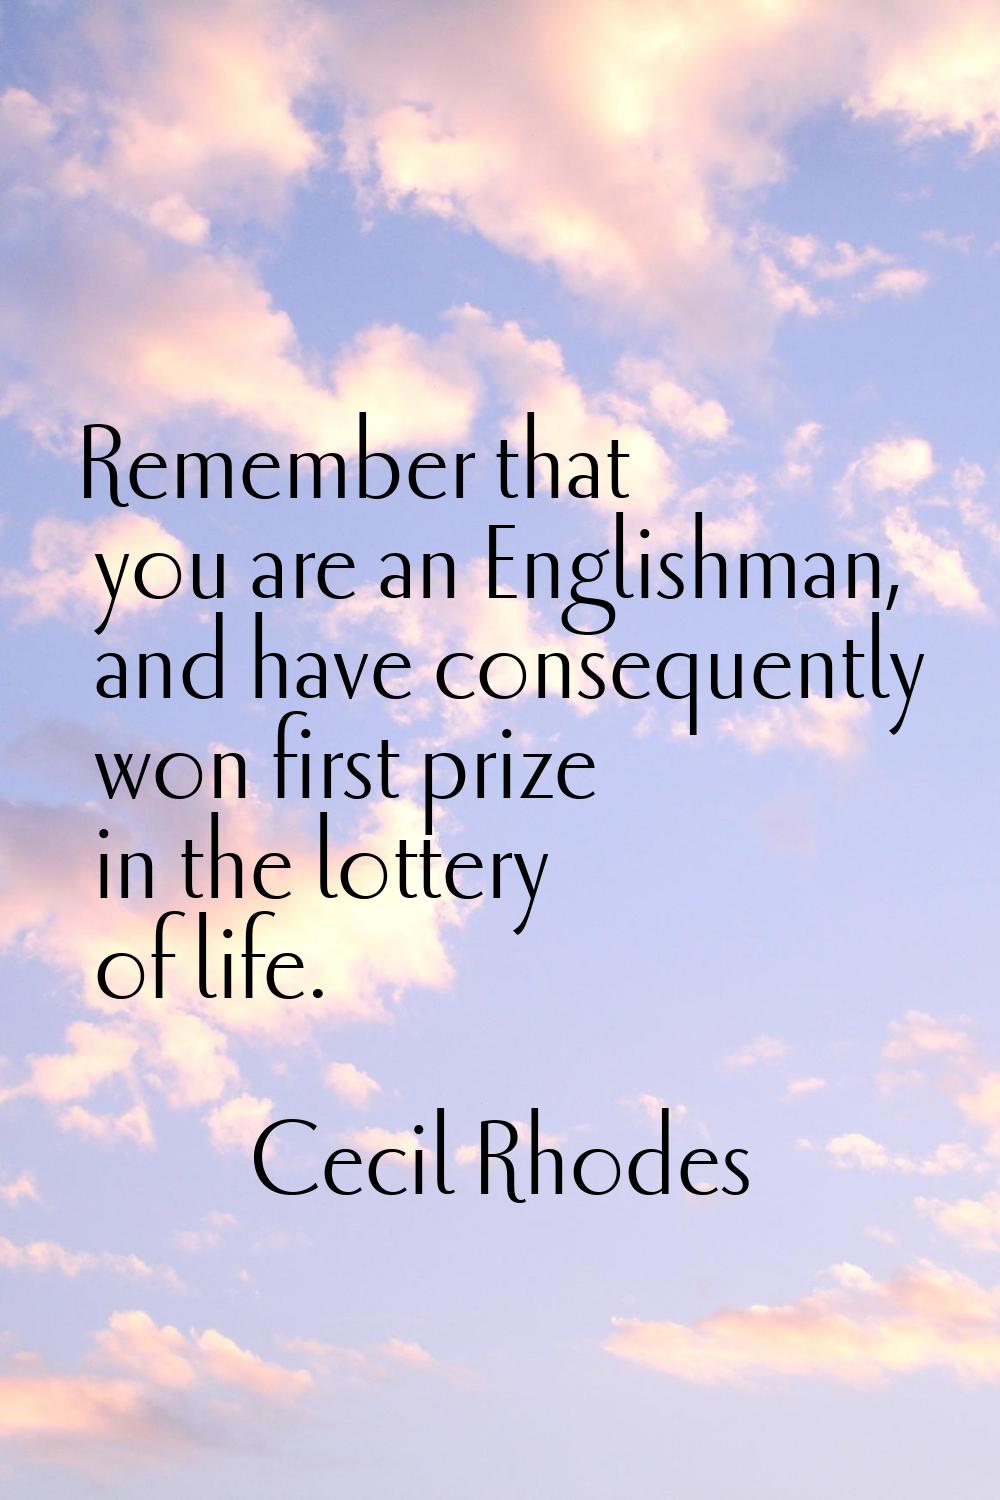 Remember that you are an Englishman, and have consequently won first prize in the lottery of life.